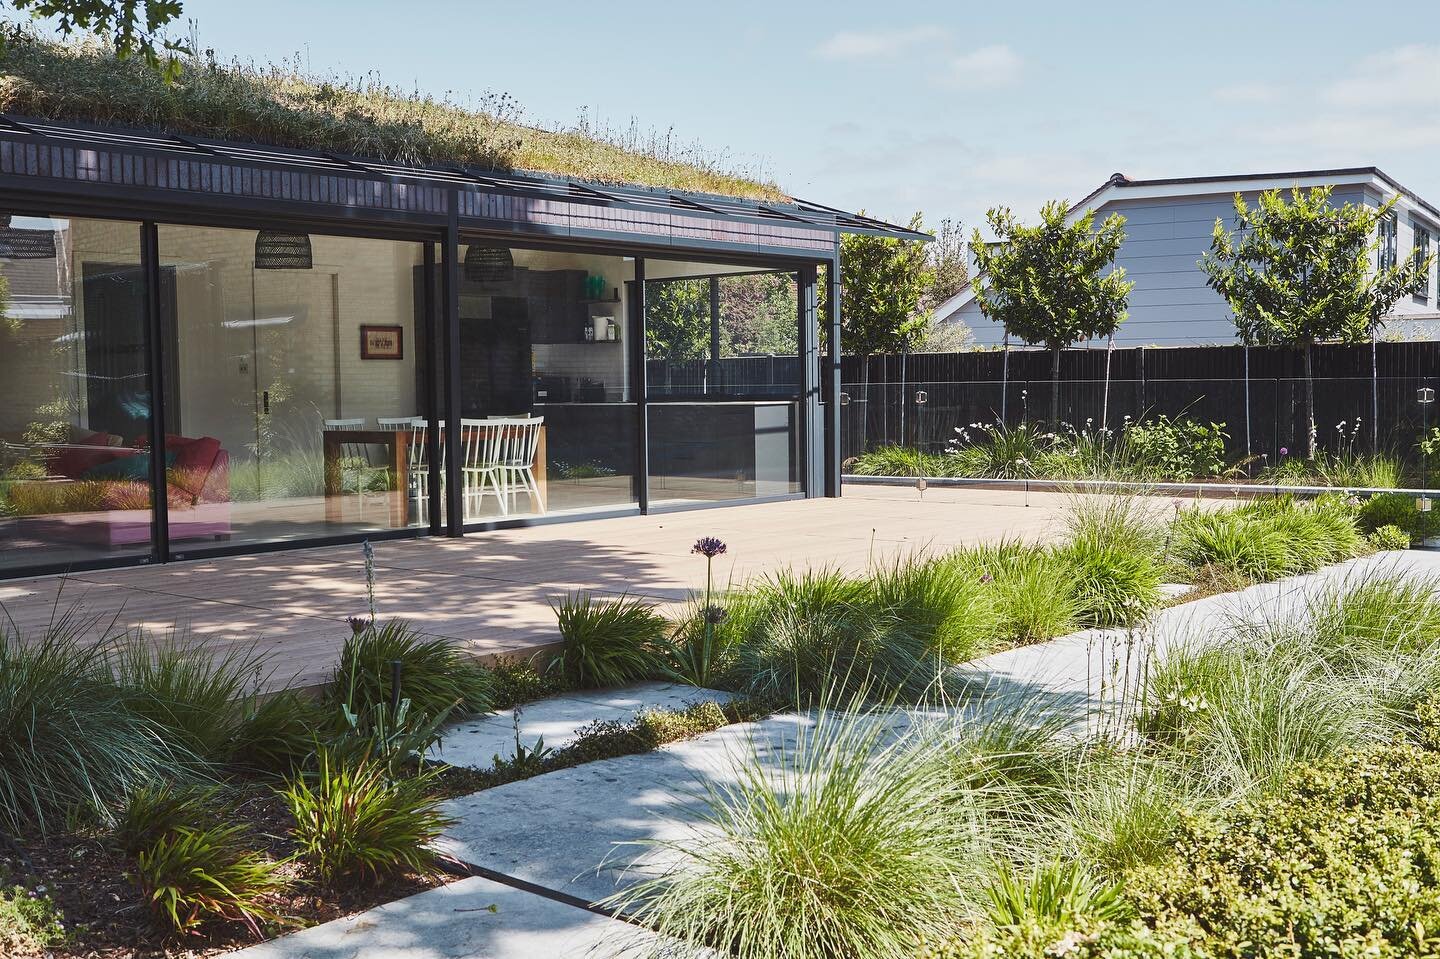 Appreciating the surroundings of this pool house we recently completed, featuring exposed steel structure and a wildflower green roof.

Interior design: @colour_interiors_ltd 
Architect: @jaamarchitects 
Contractor: @mascotbespoke 
Windows: @maxlight